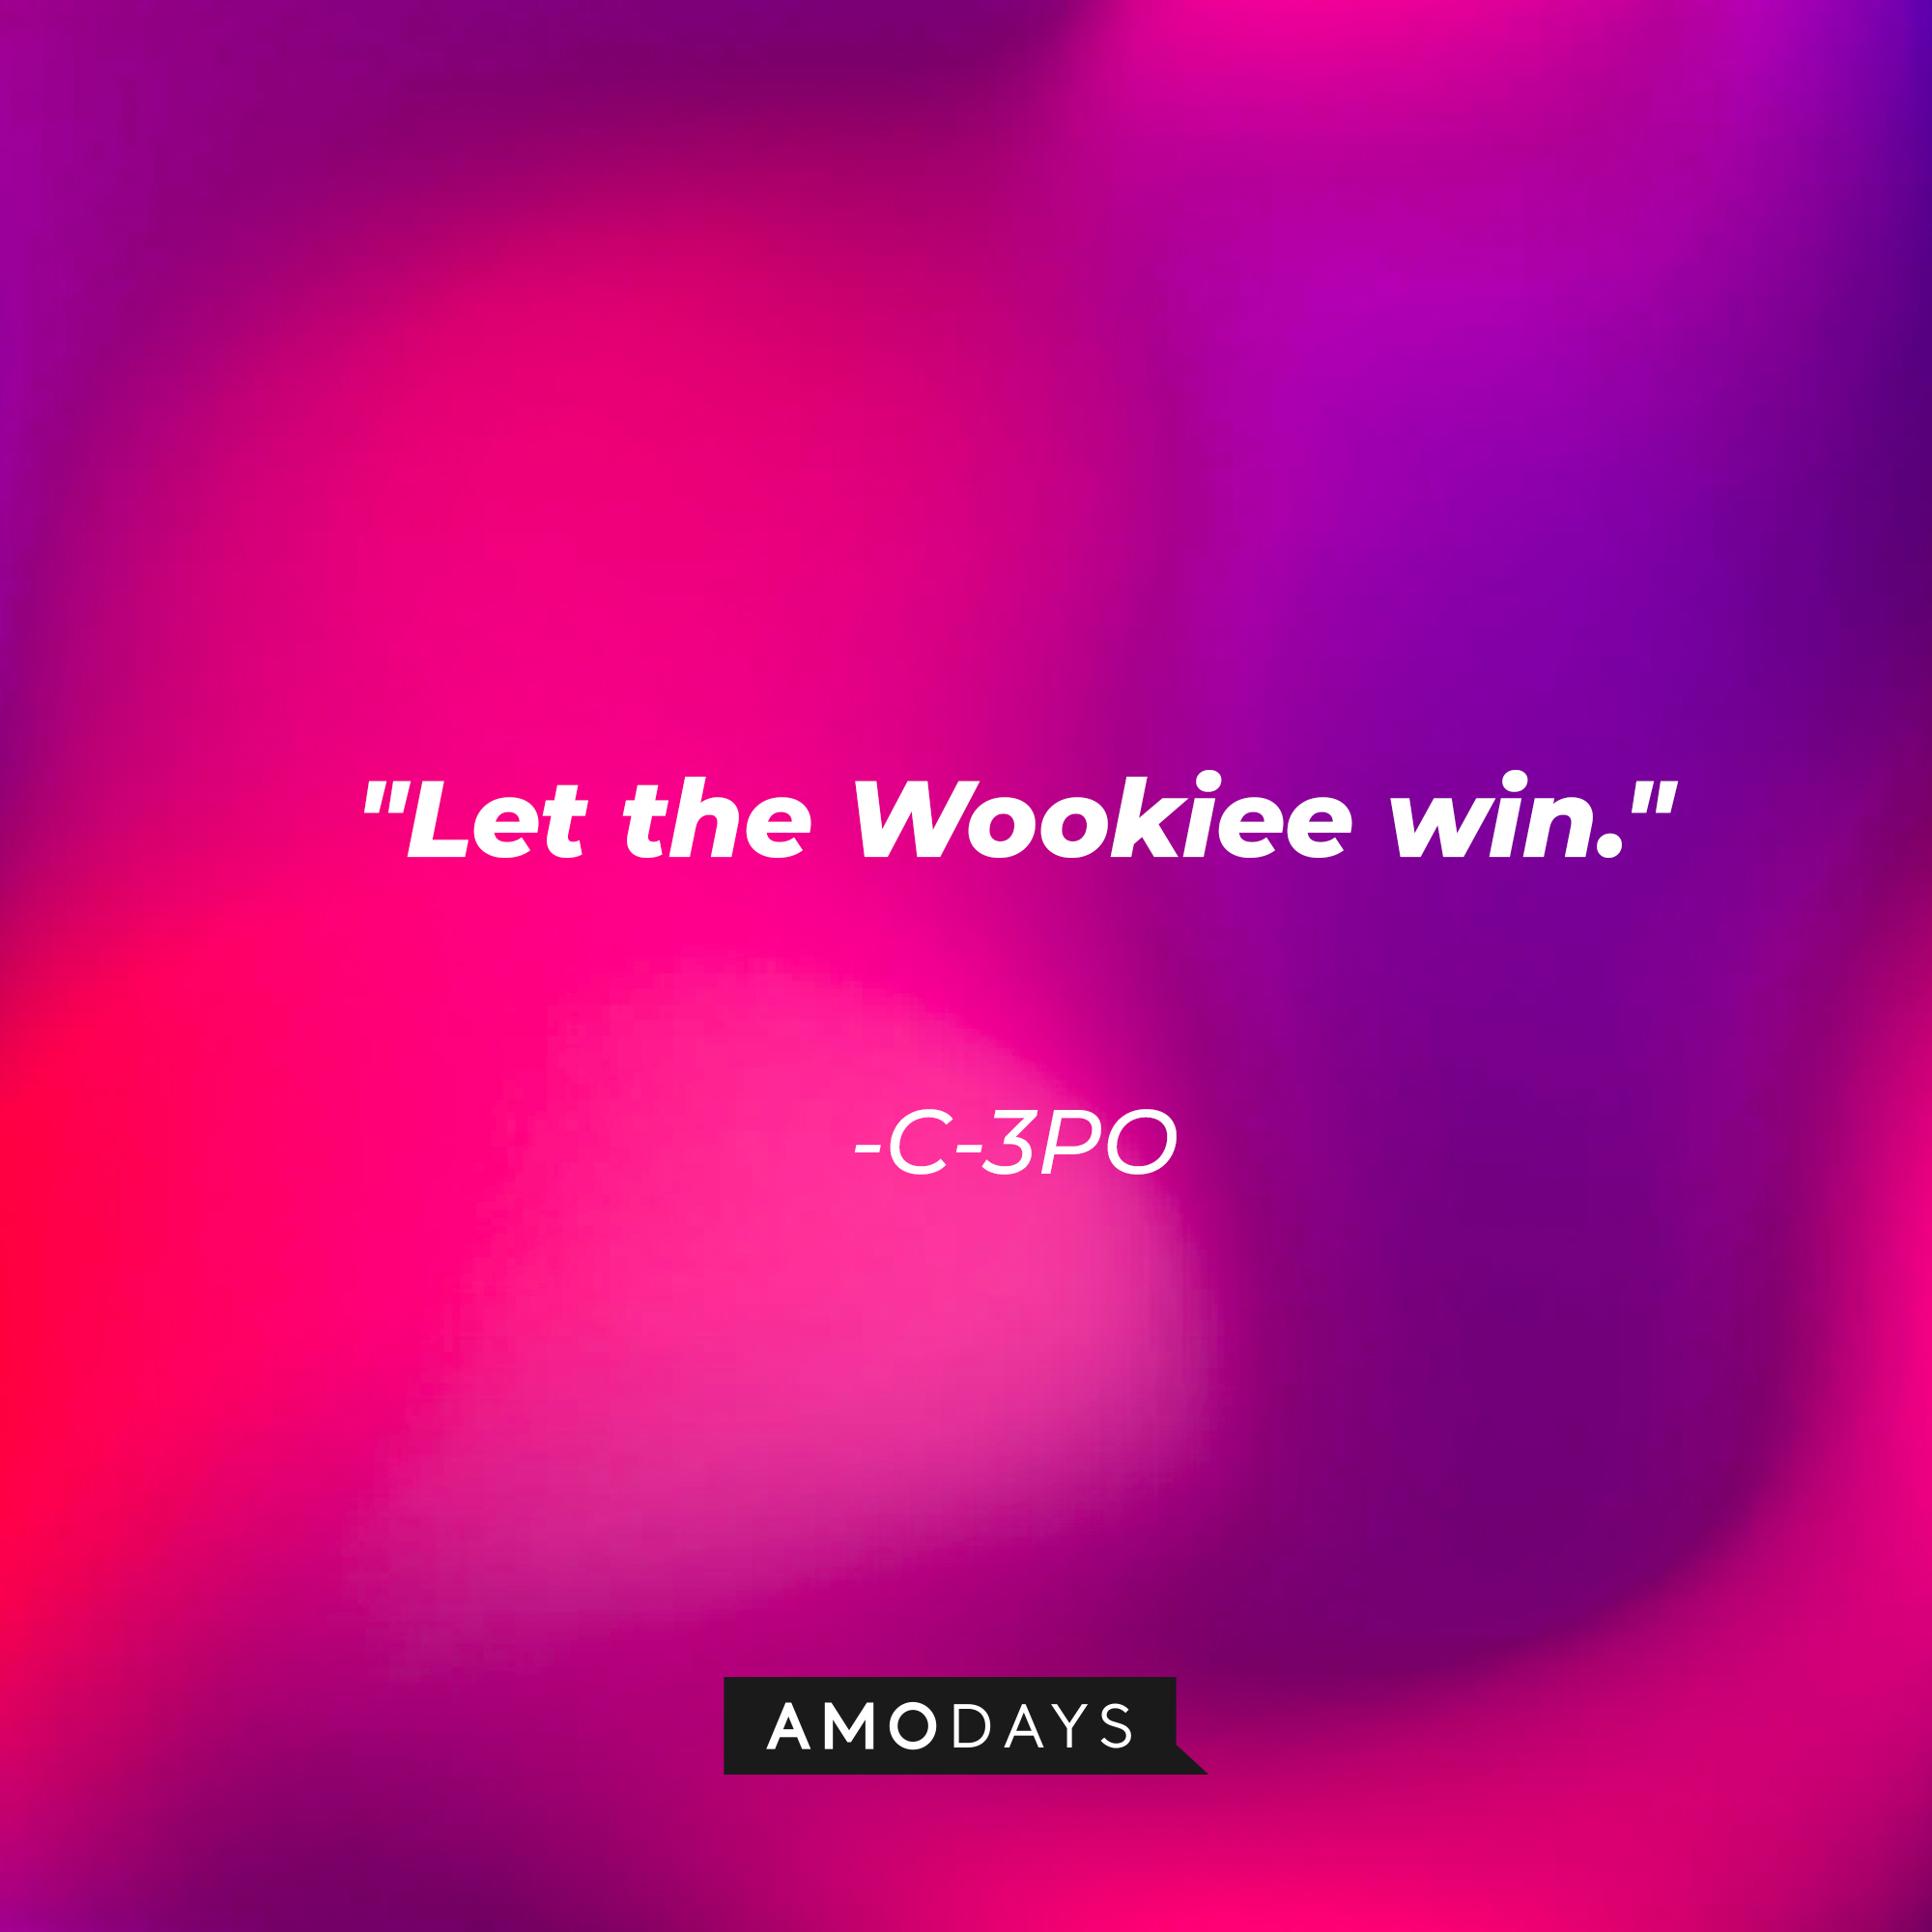 C-3PO's quote: "Let the Wookiee win." | Source: AmoDays